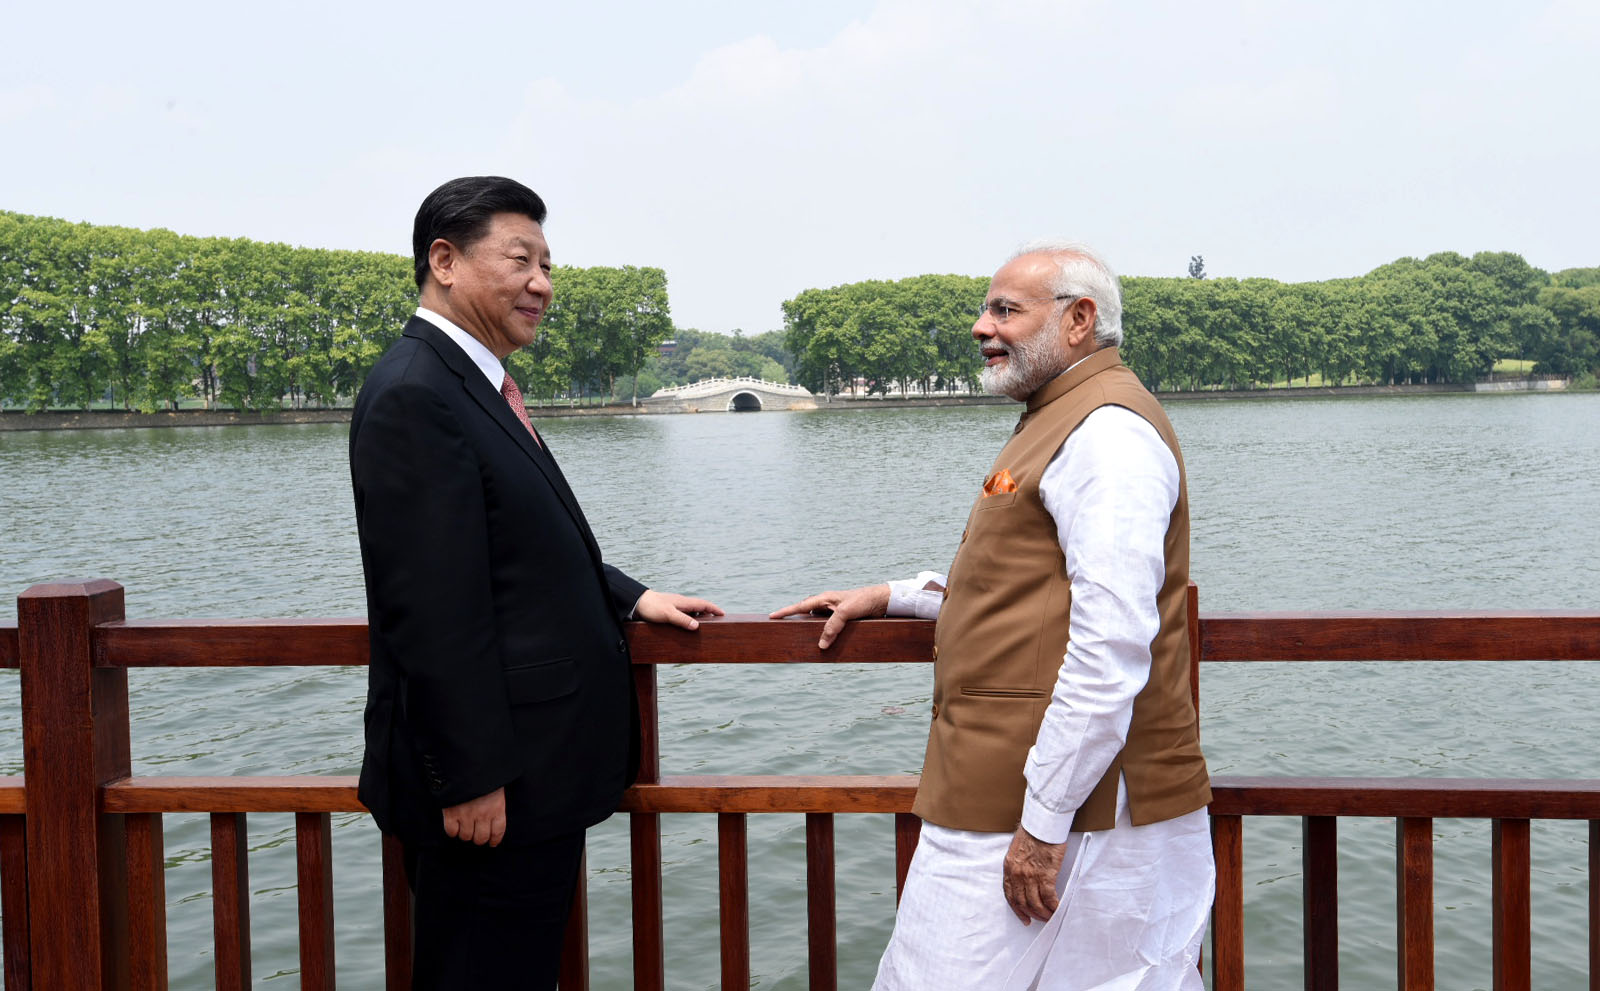 <p>Indian Prime Minister Narendra Modi Chinese President Xi Jinping along the East Lake, in Wuhan, China on April 28, 2018. (Photo: Press Information Bureau, Government of India)</p>